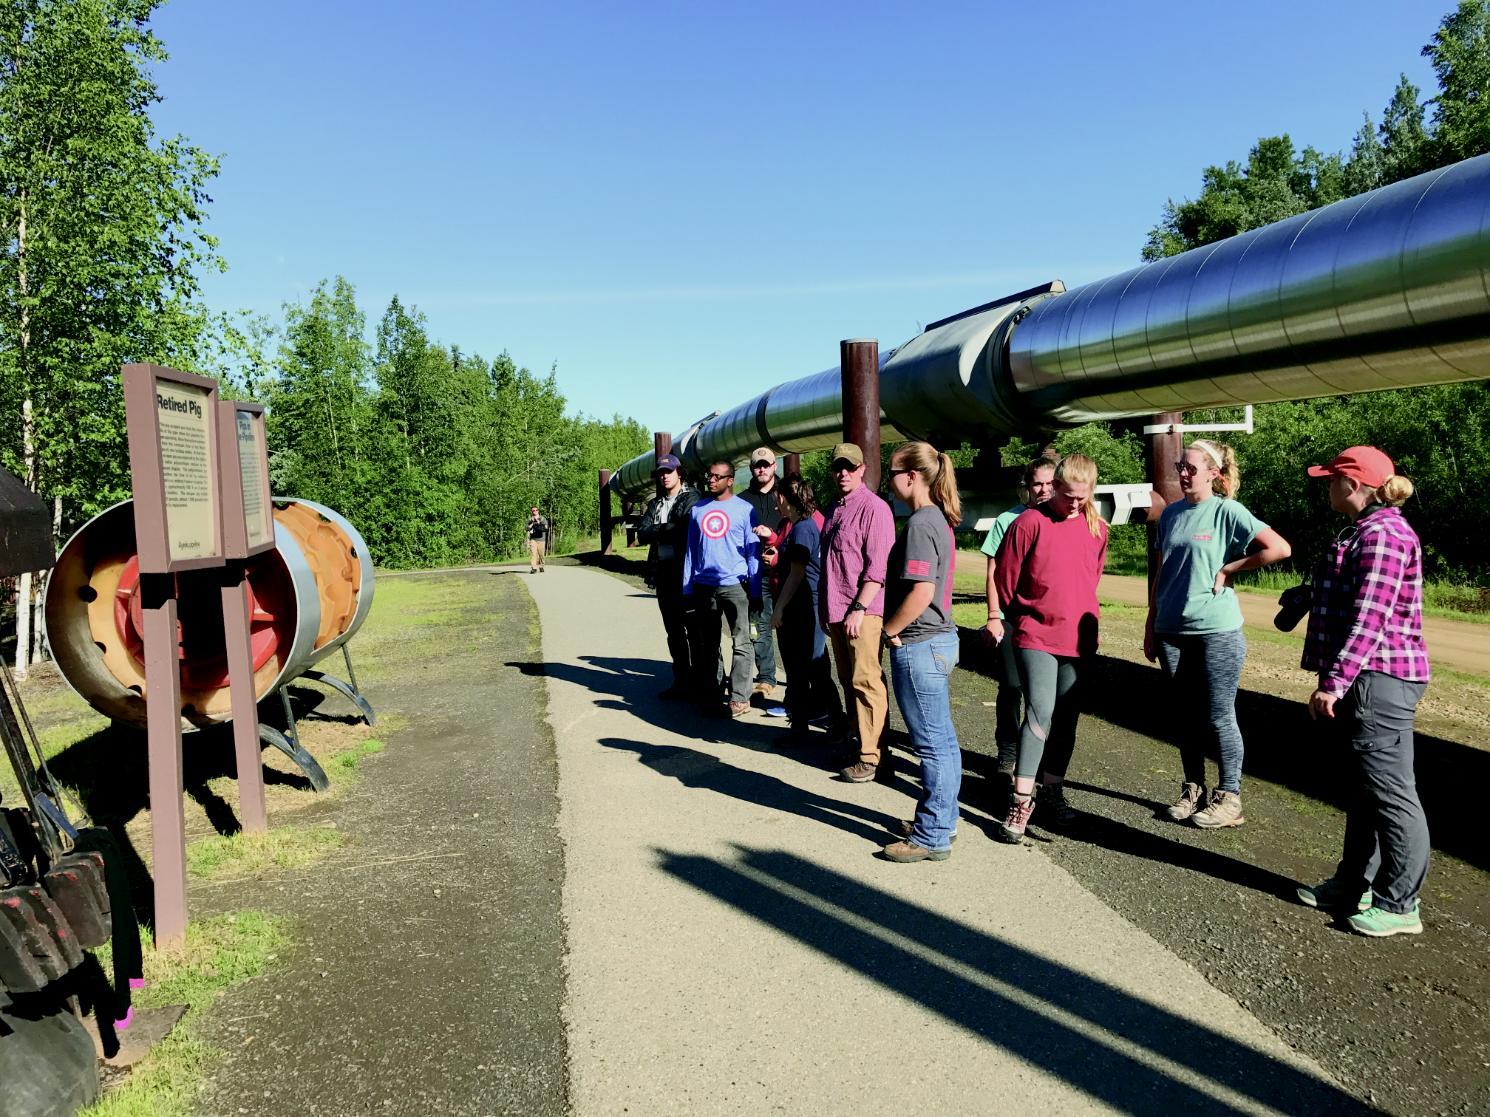 Students traveled to Alaska to study issues surrounding pipelines